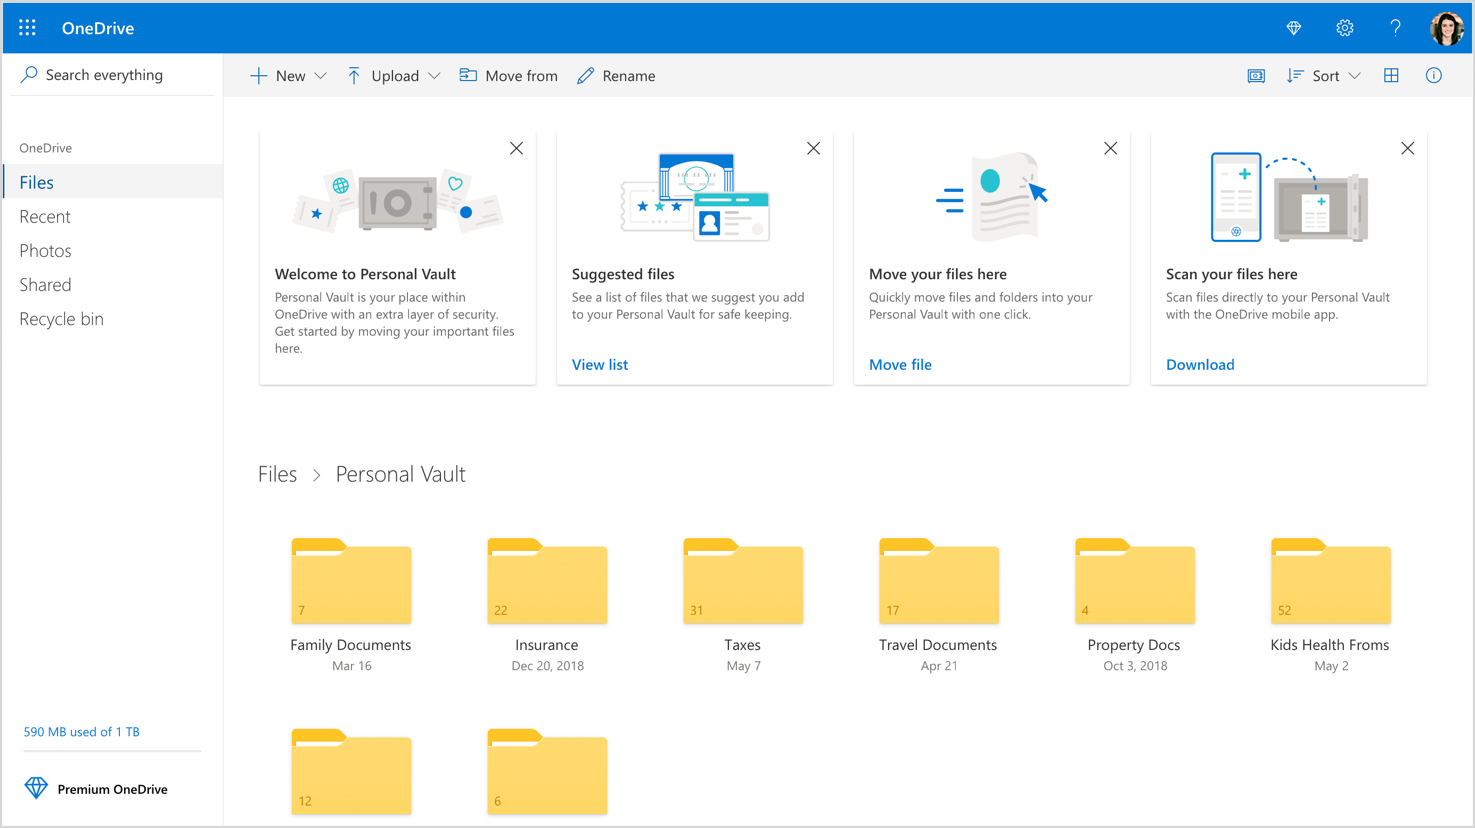 OneDrive Personal Vault lets you store your sensitive files with an extra layer of protection